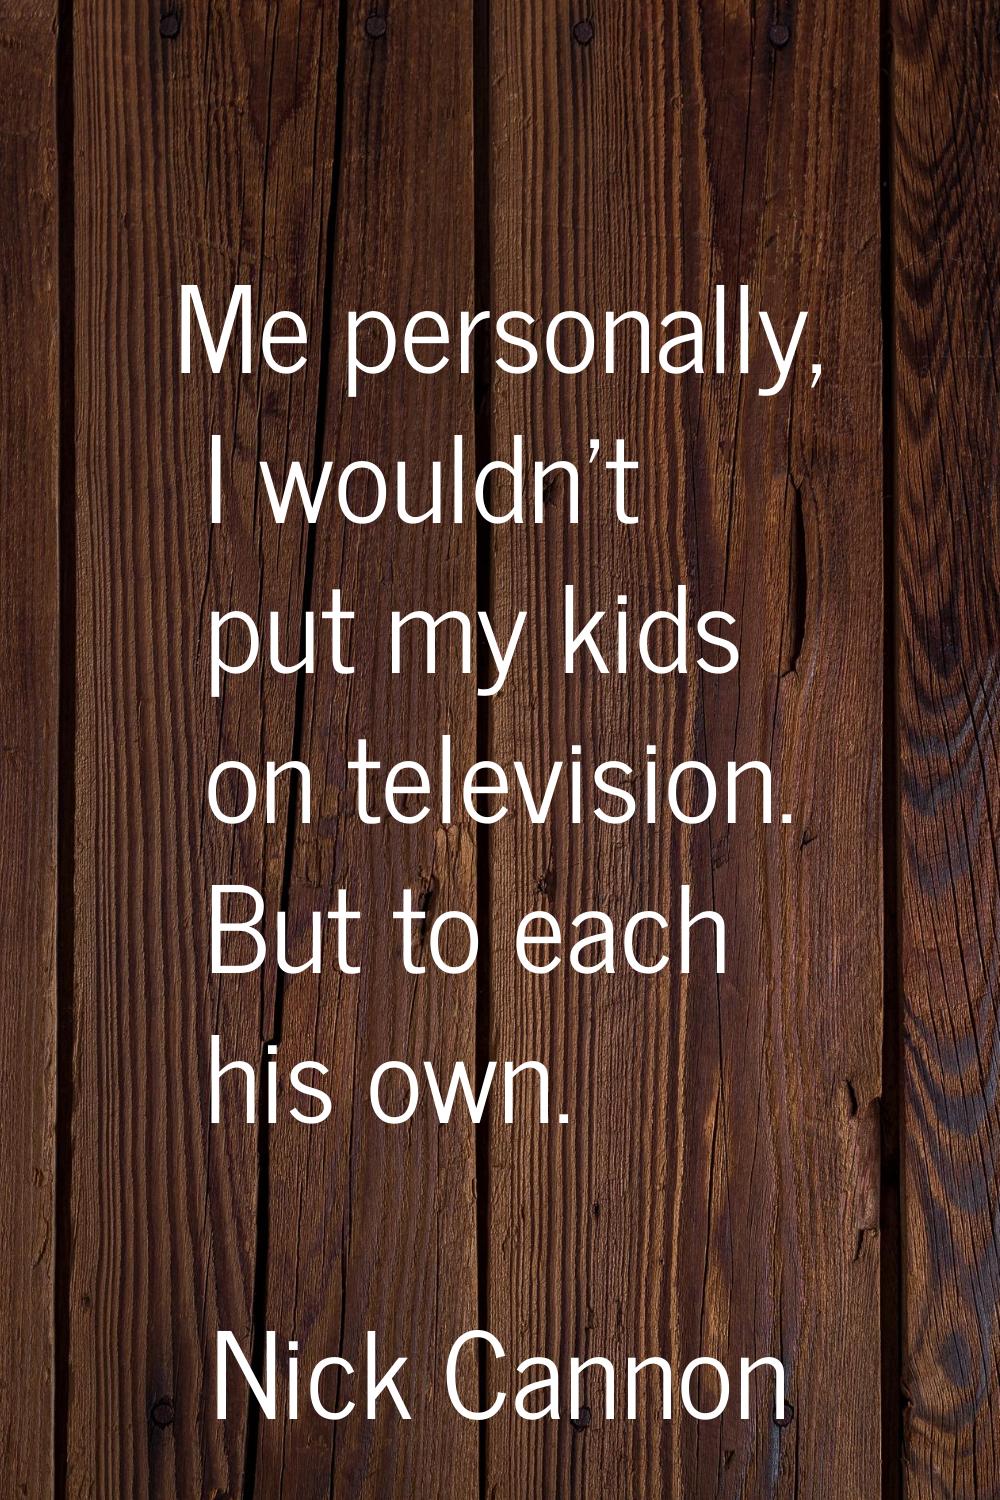 Me personally, I wouldn't put my kids on television. But to each his own.